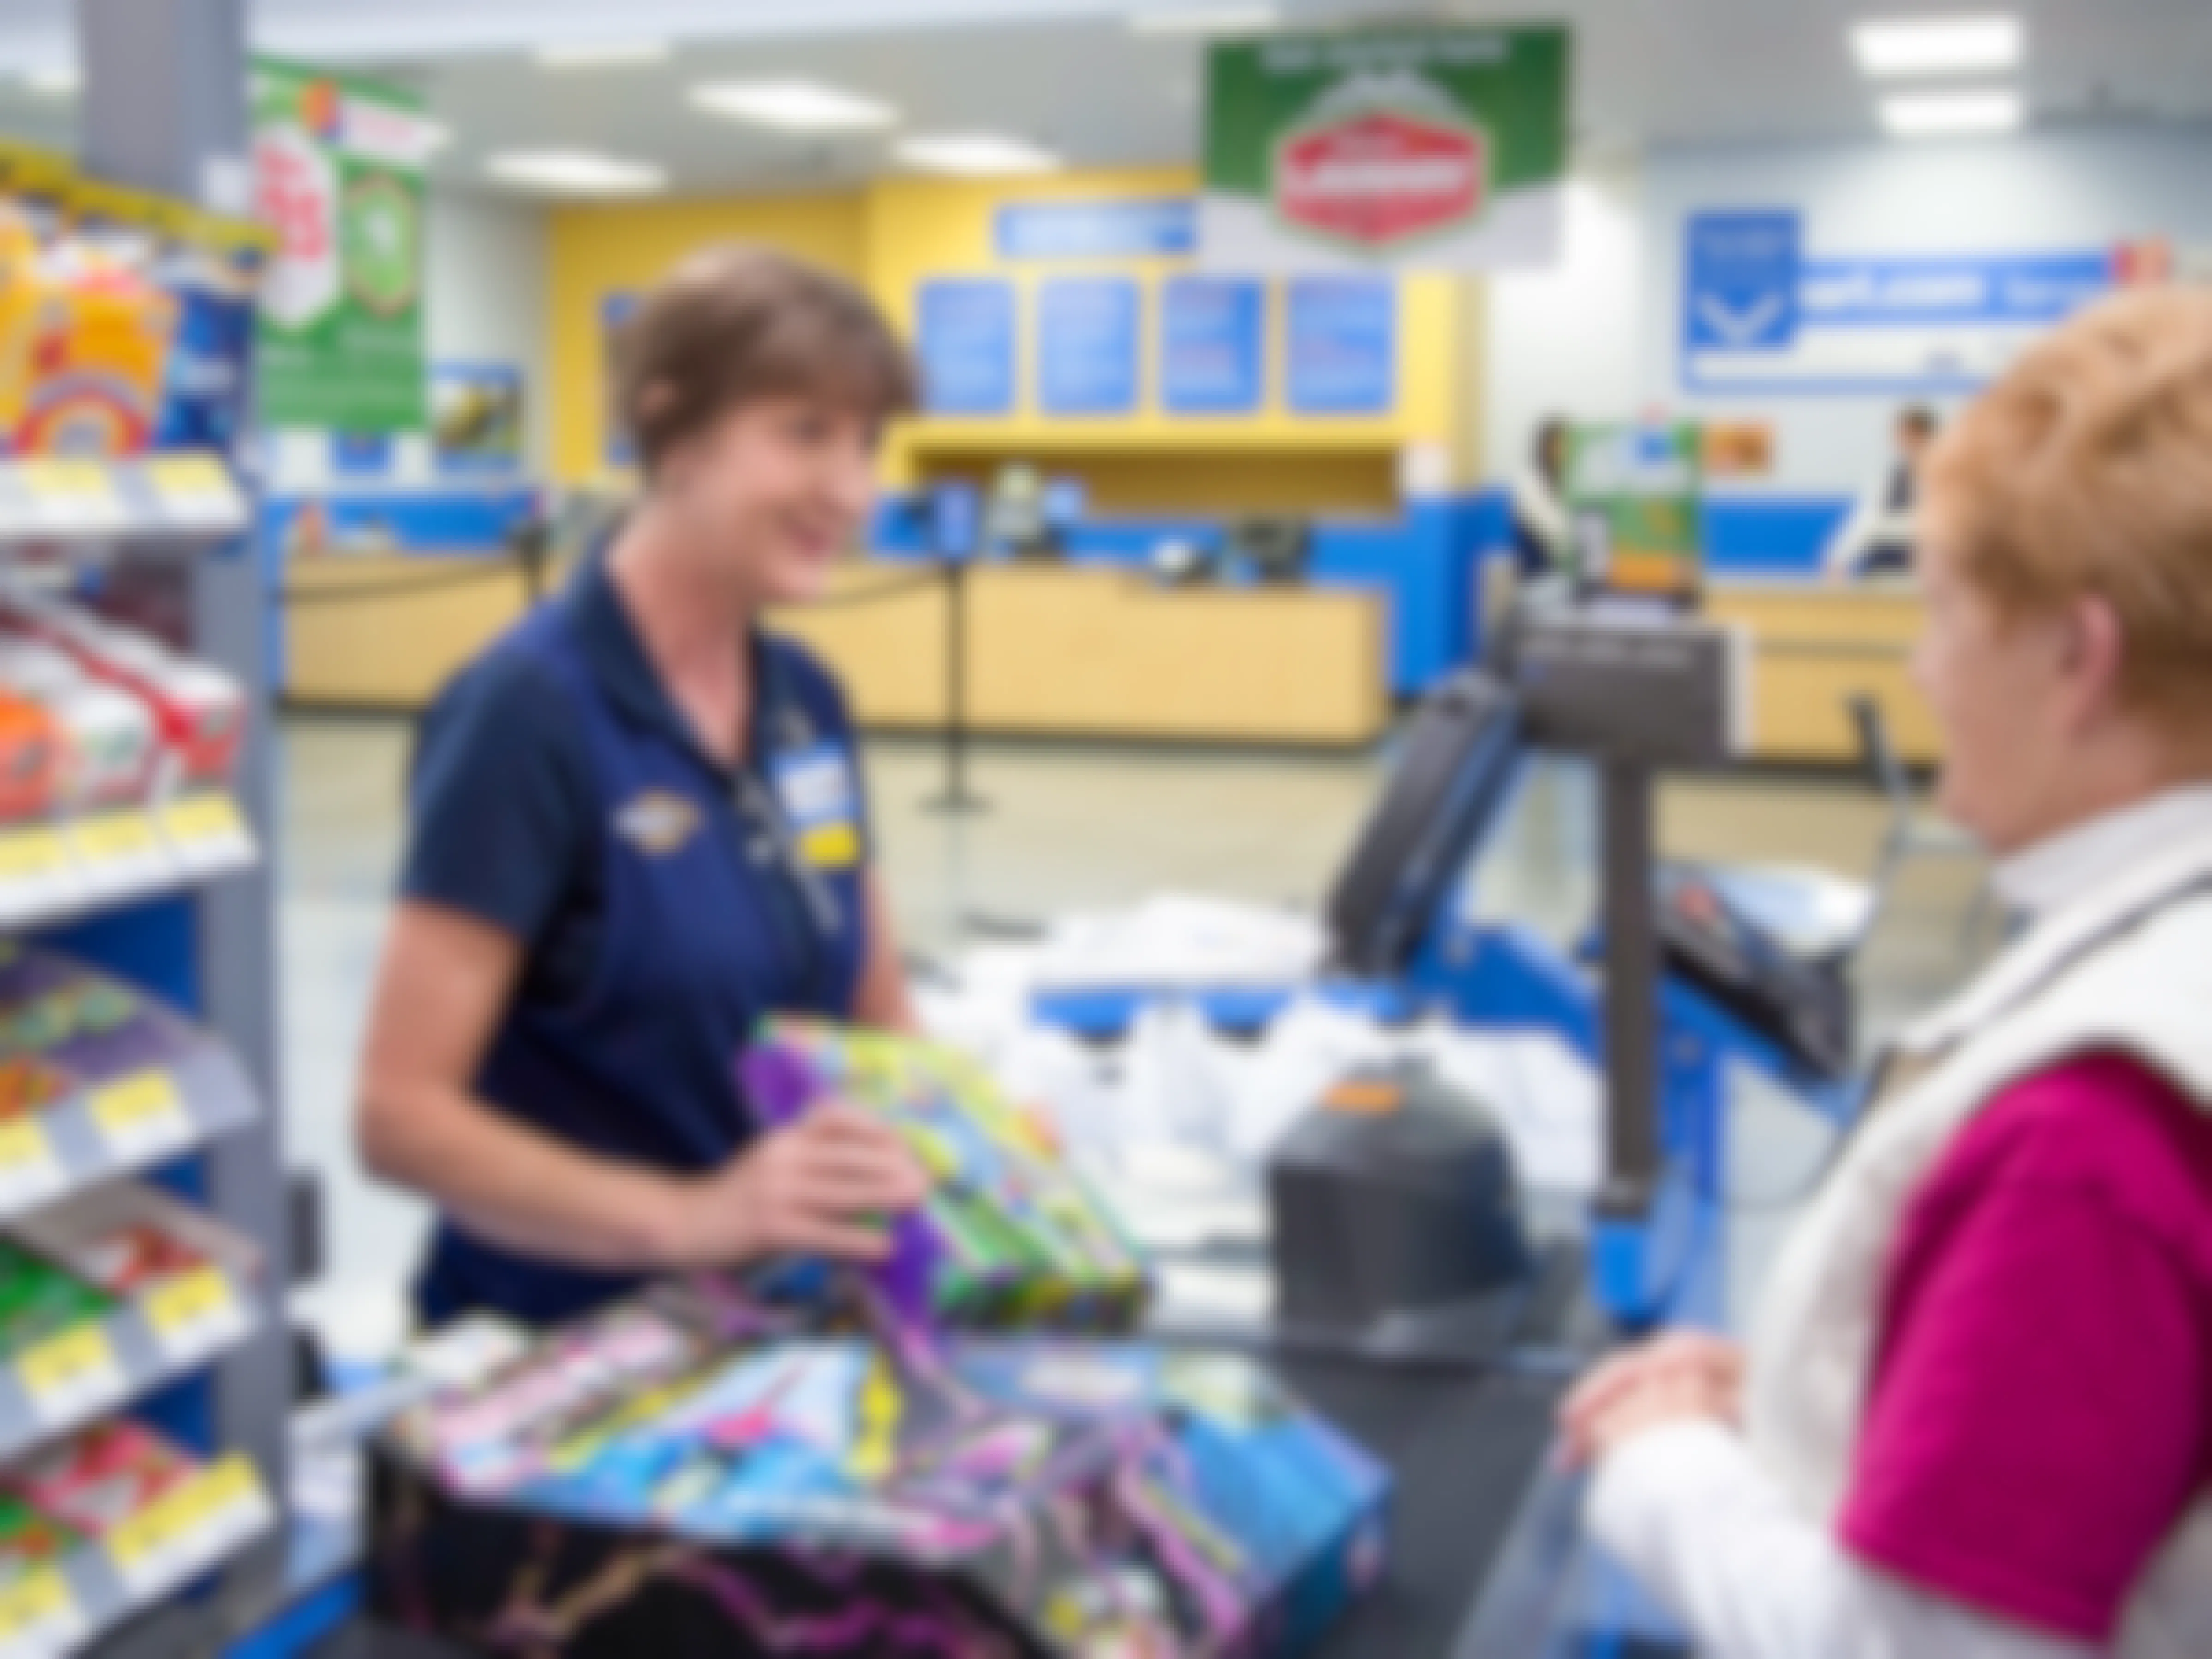 A Walmart employee scanning items for a customer at the checkout counter.